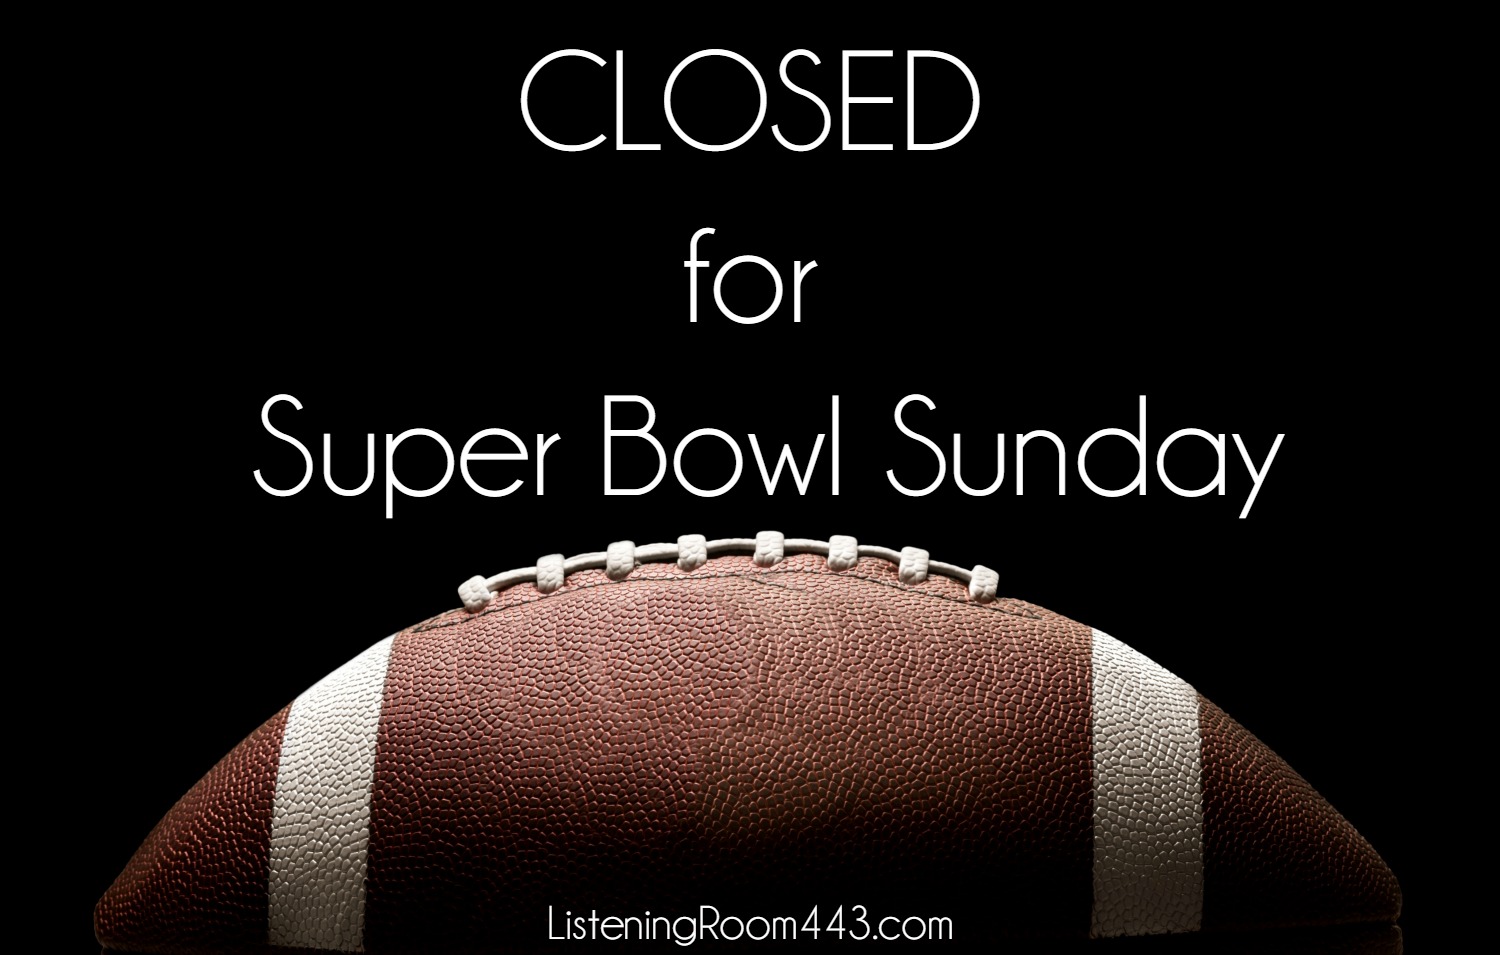 CLOSED Super Bowl Sunday The 443 Social Club & Lounge